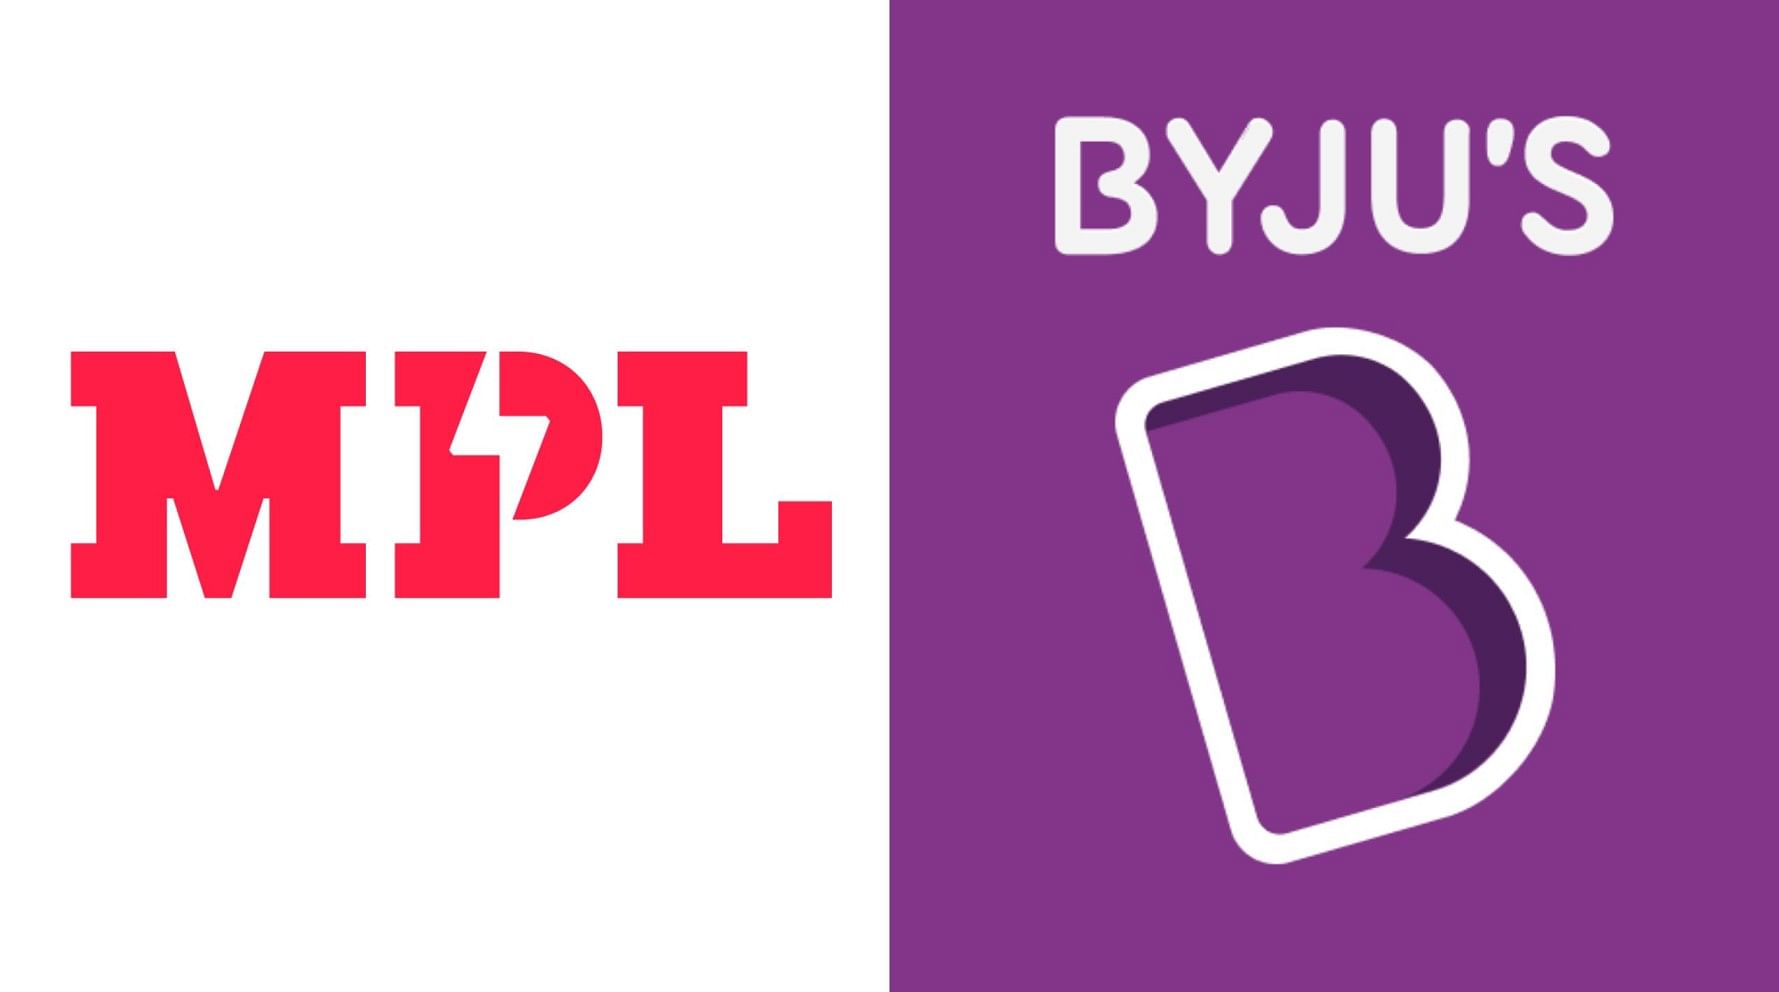 BCCI Initiates Corporate Insolvency Proceedings Against Byju's for Alleged  Default in Payment | Startup Story